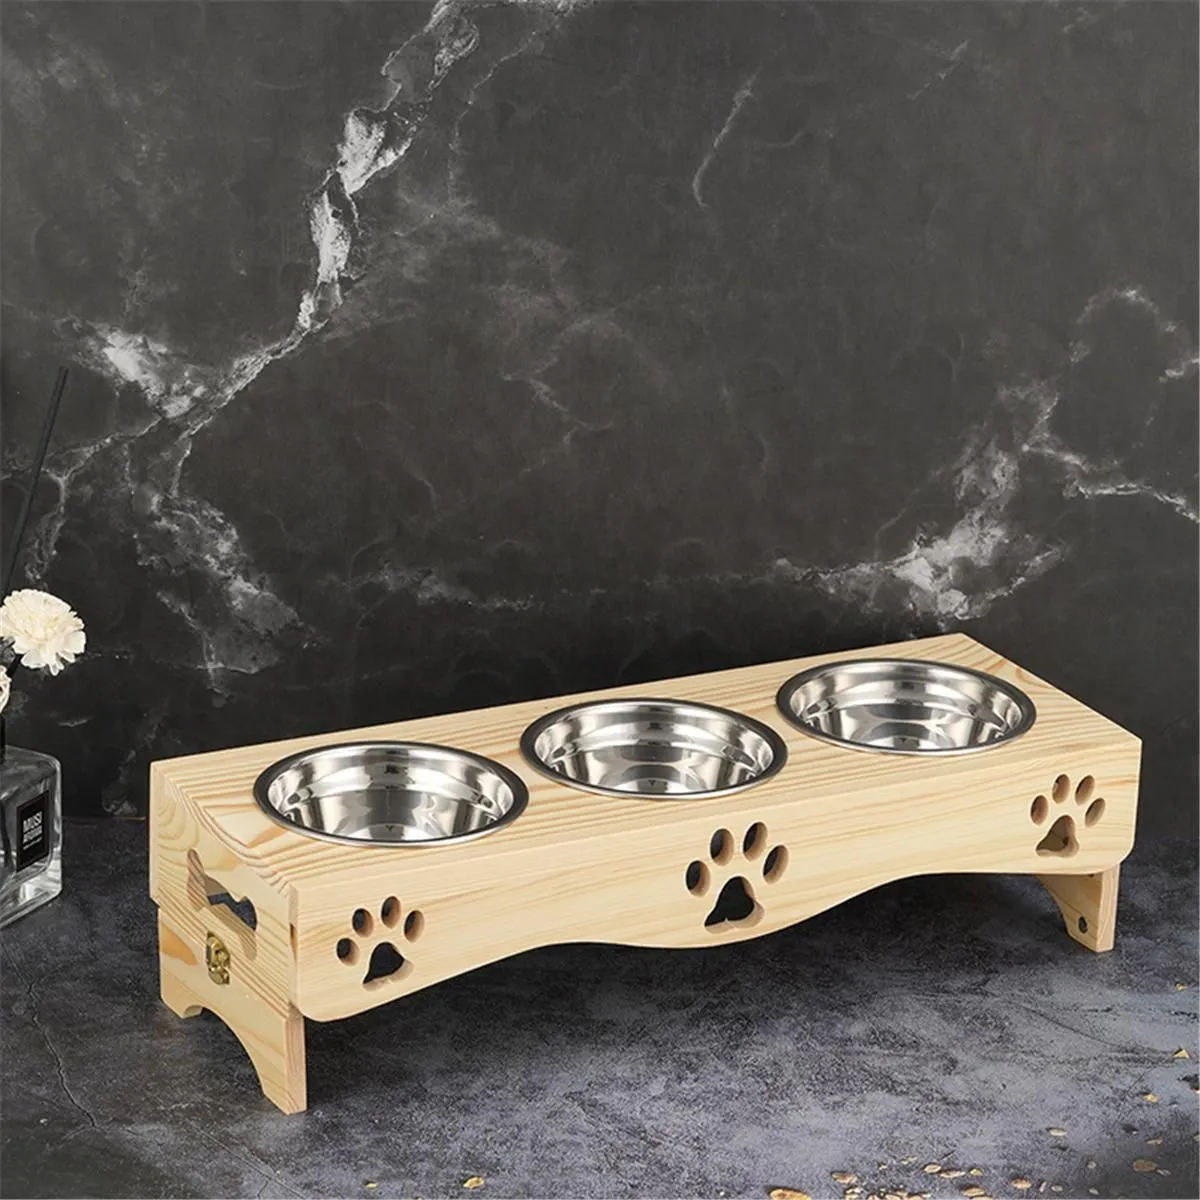 Feeding 3 Stainless Steel Dog Bowl with Wooden Base Pet Supplies Cat Dog Feeders